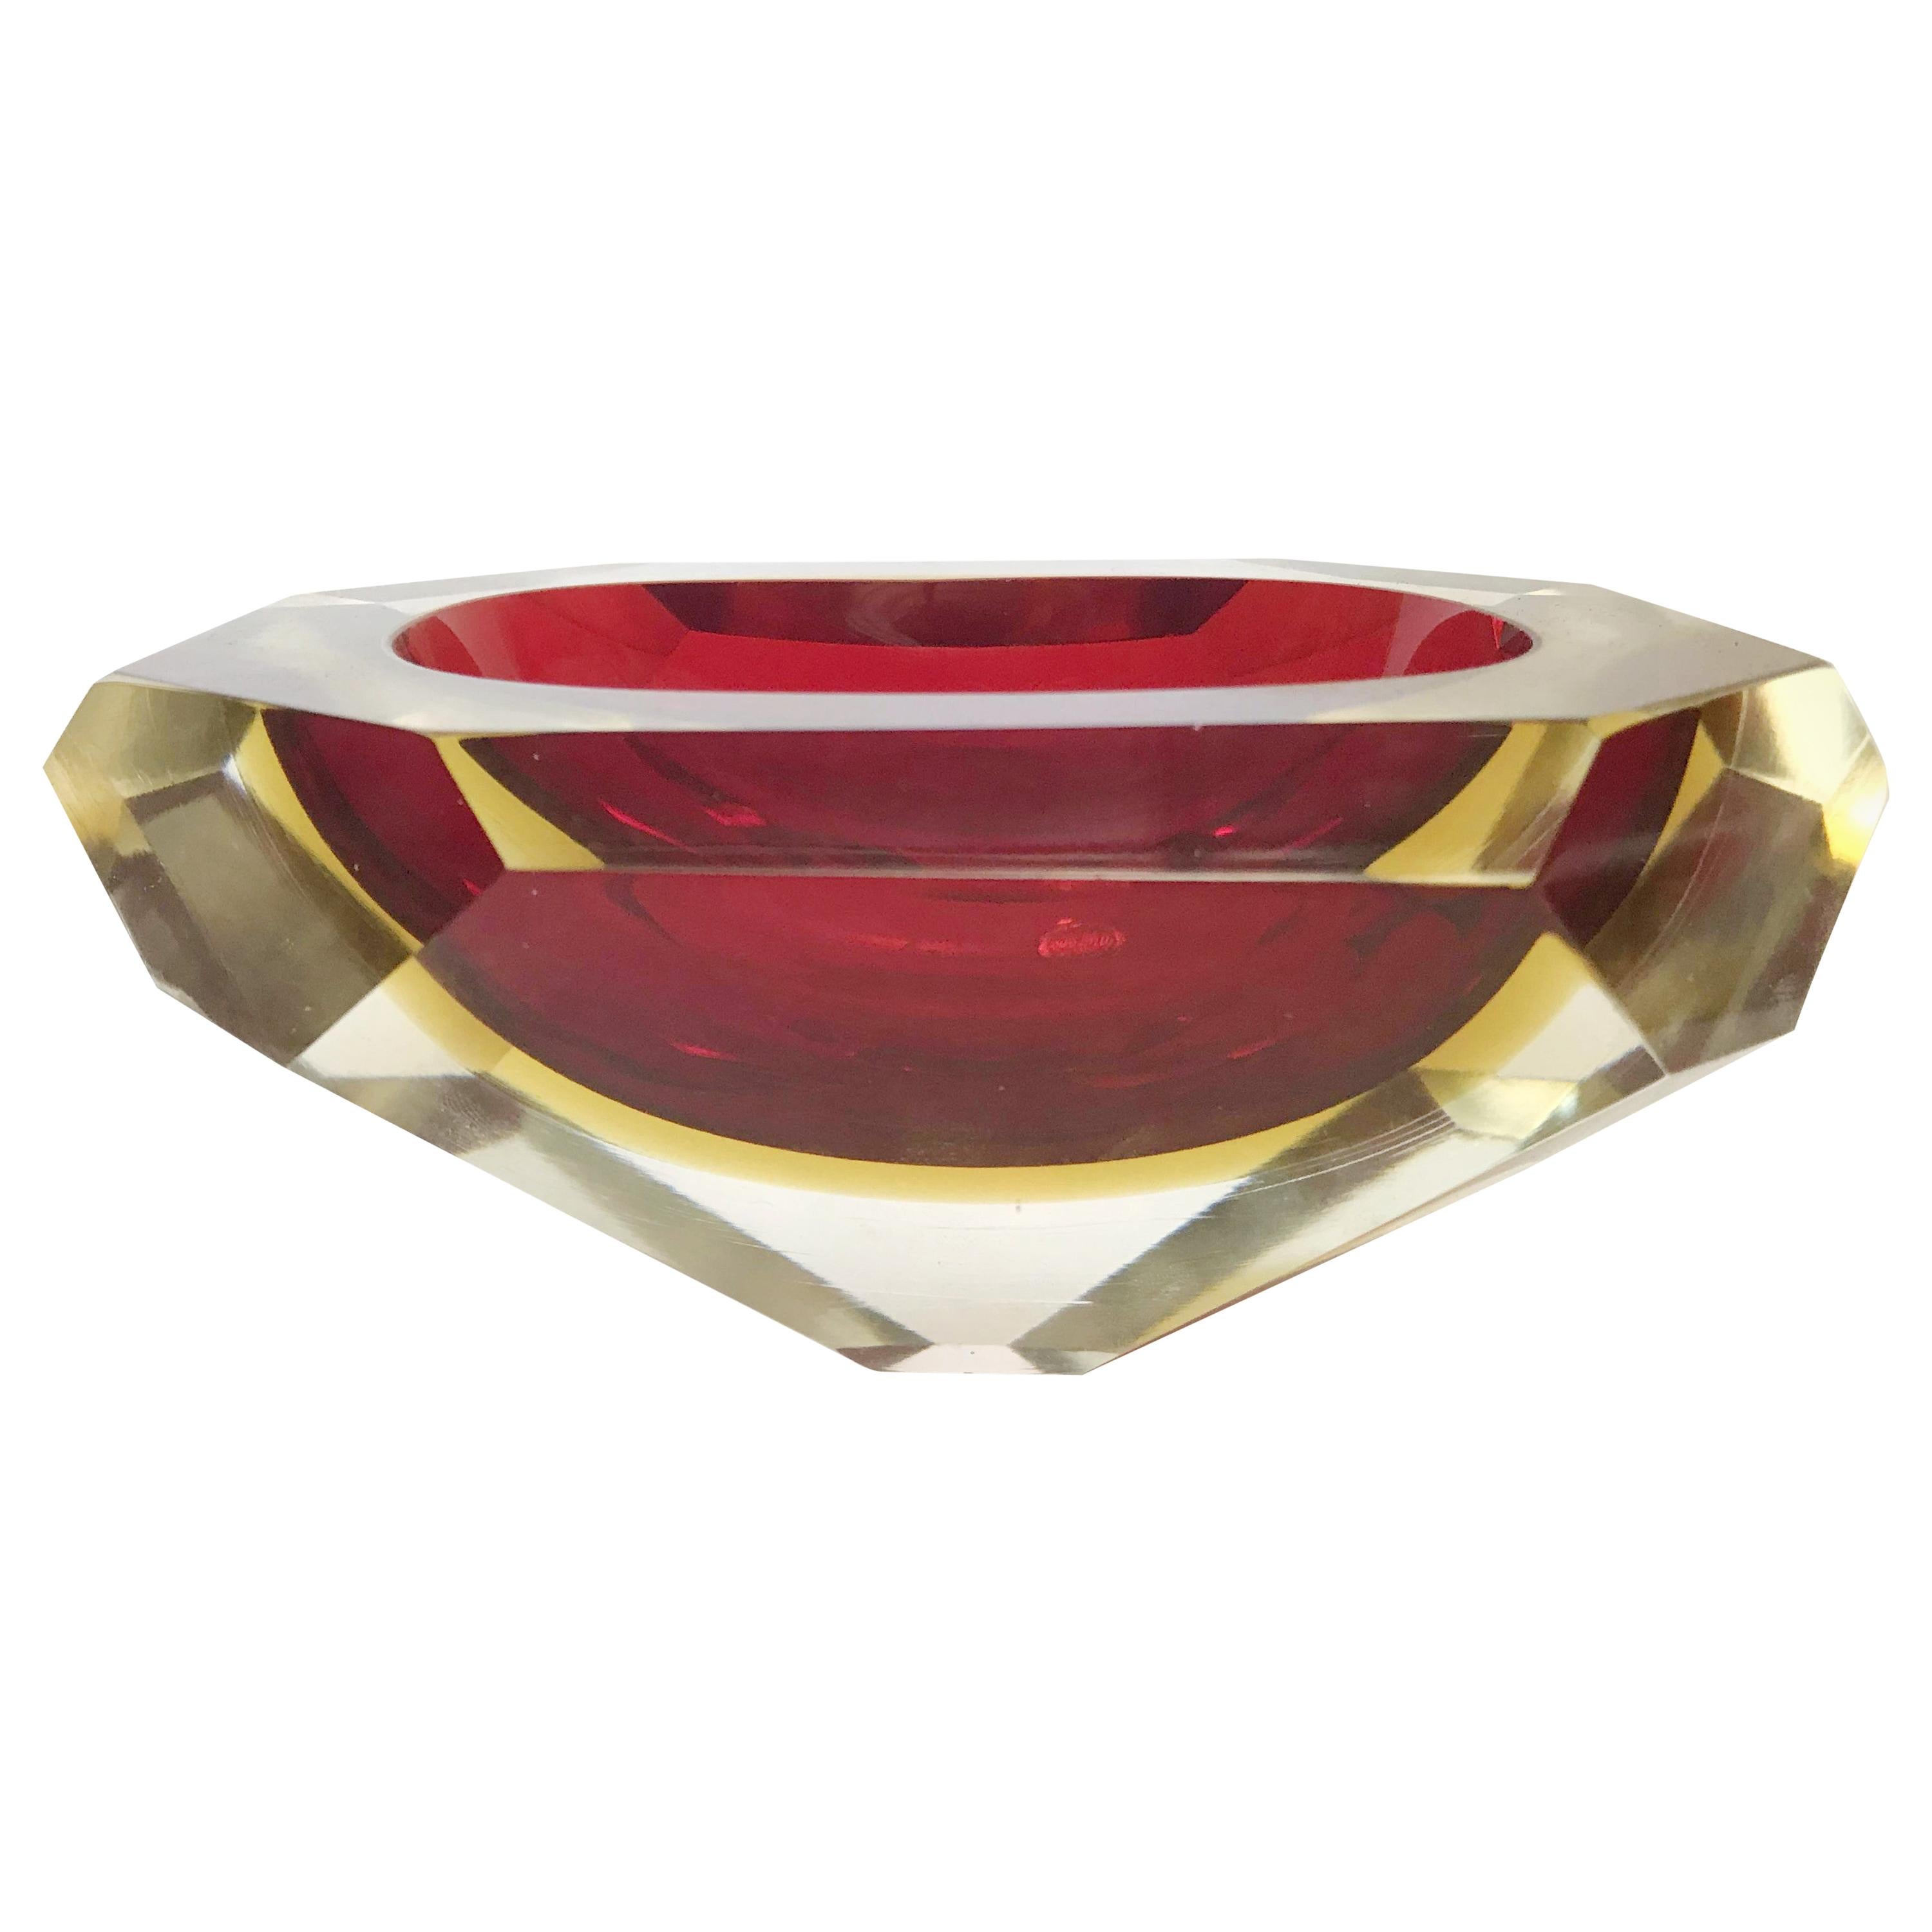 Red Faceted Sommerso Bowl by Mandruzzato FINAL CLEARANCE SALE